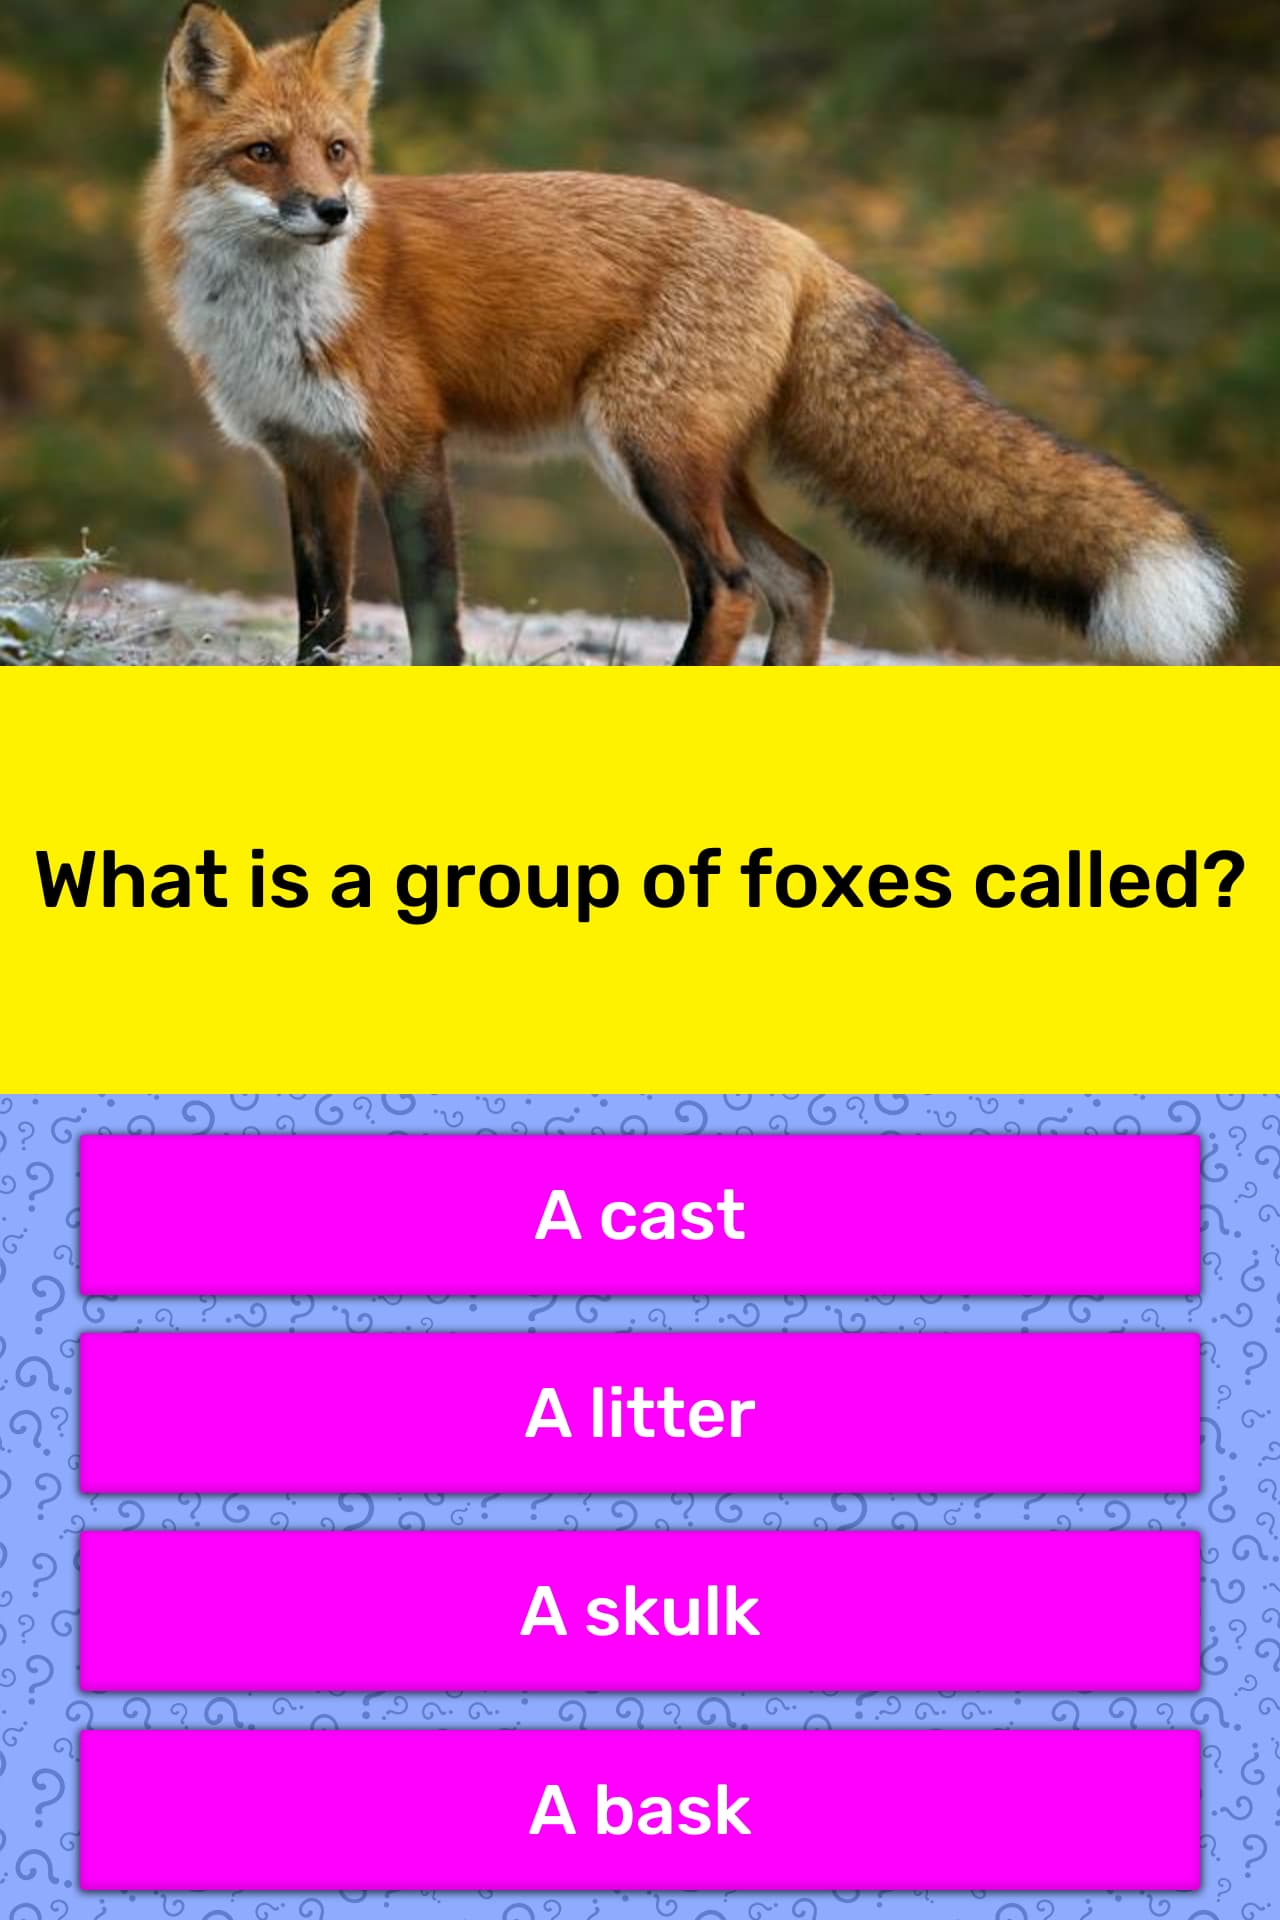 What do you call a group of foxes?